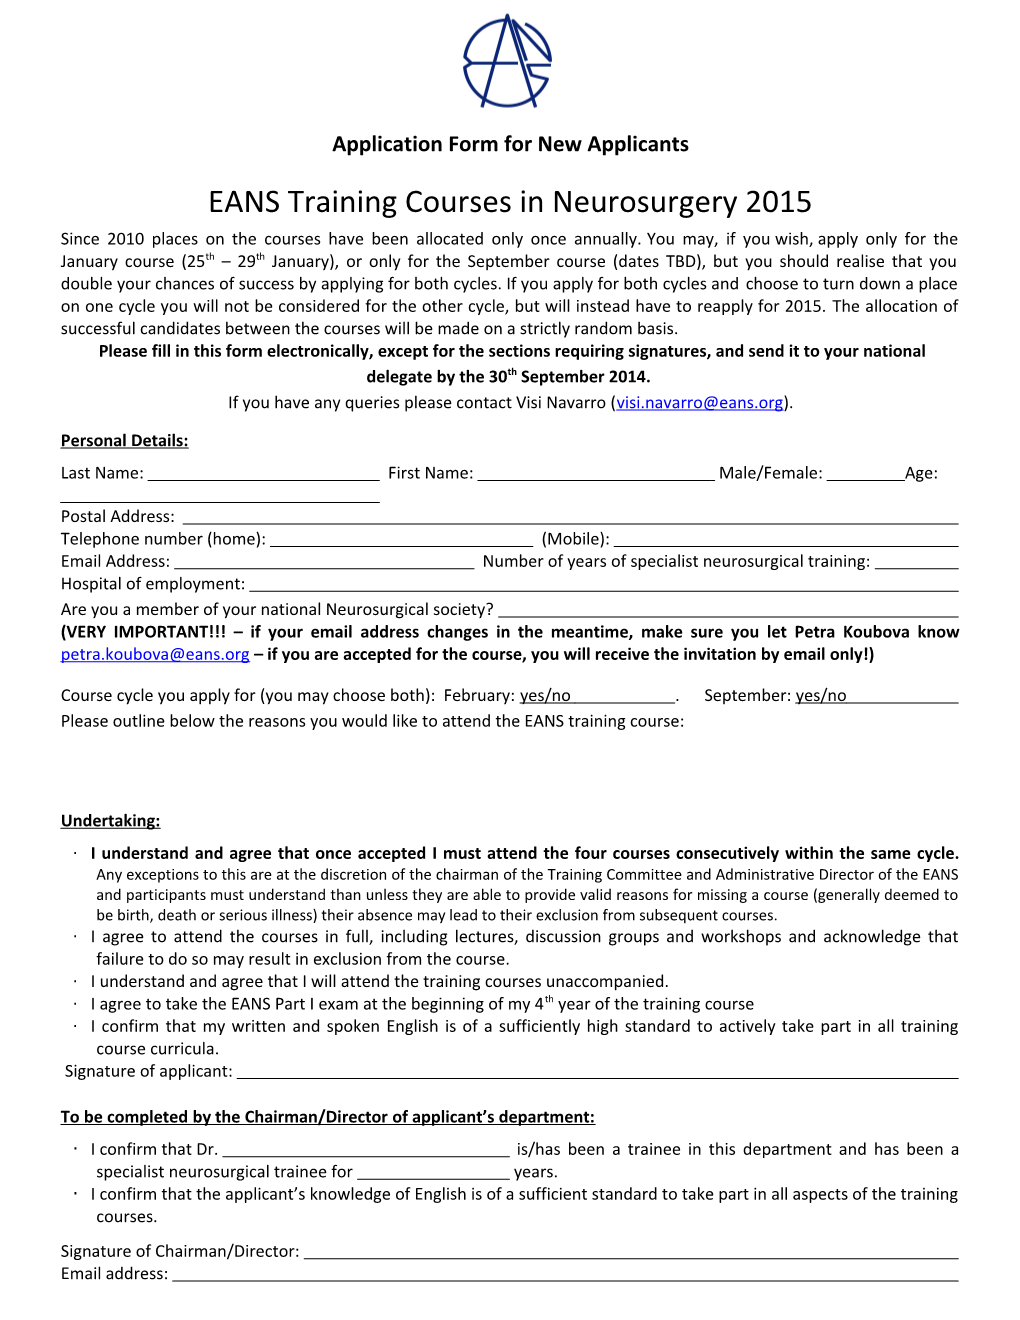 EANS Training Course in Neurosurgery